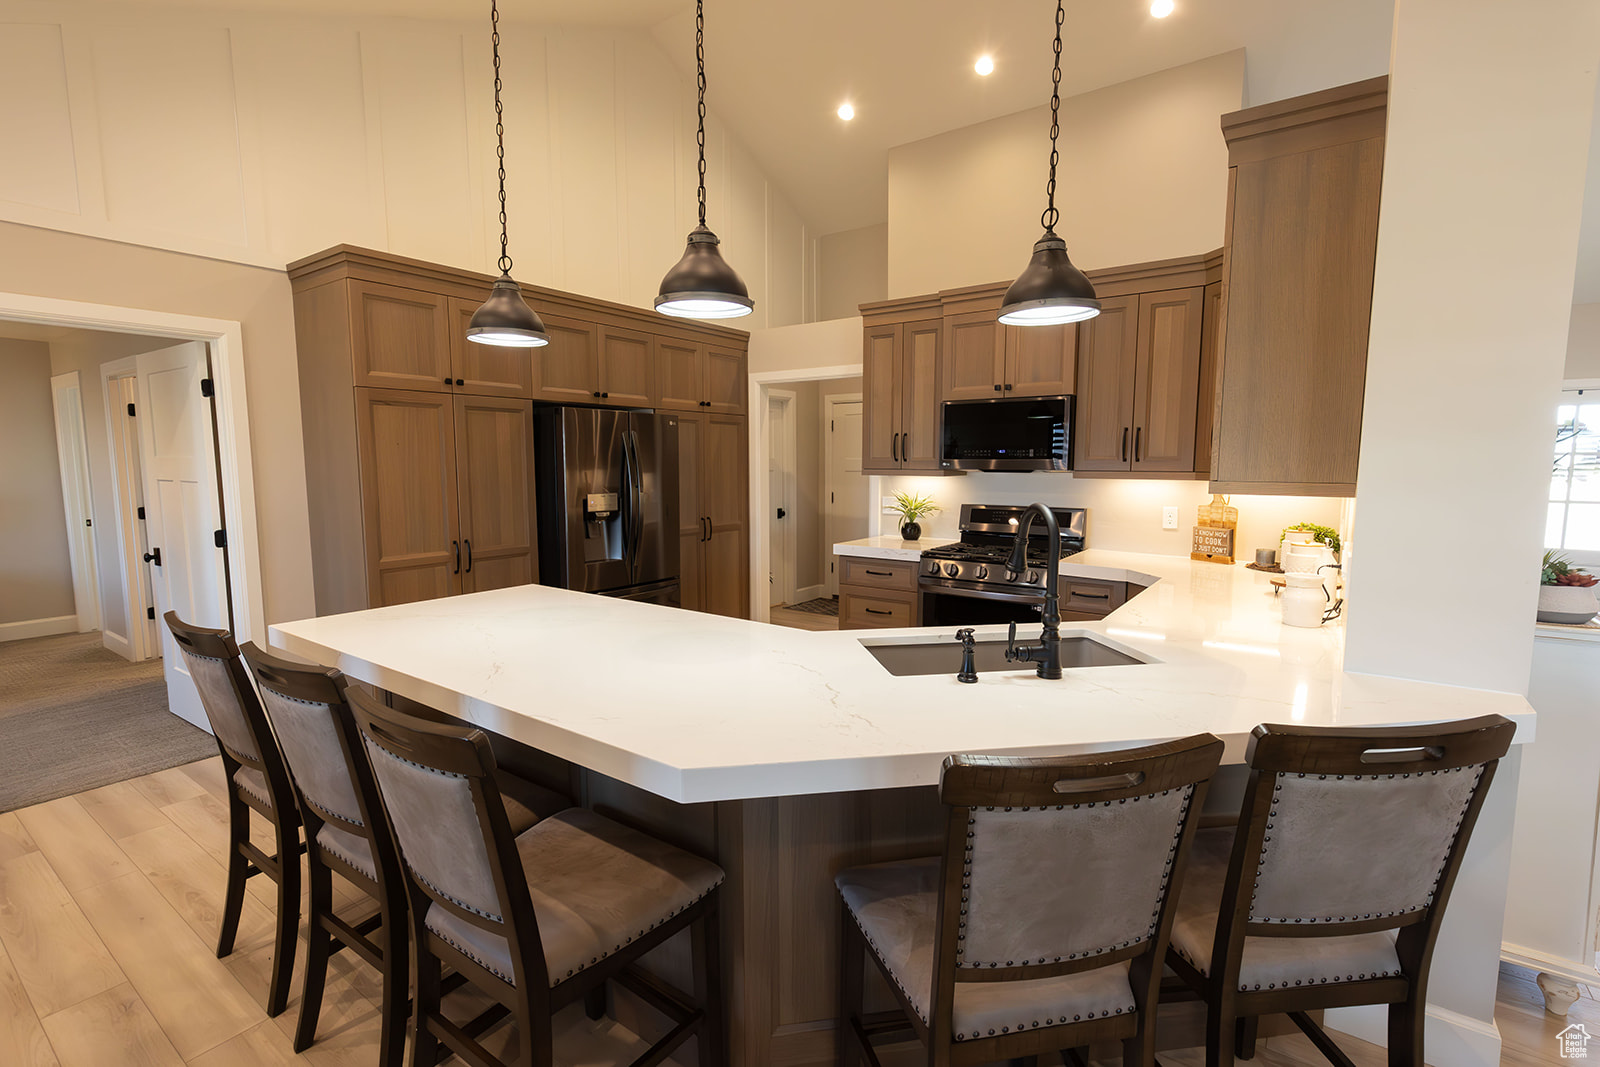 Kitchen with pendant lighting, light wood-type flooring, a breakfast bar area, and appliances with stainless steel finishes